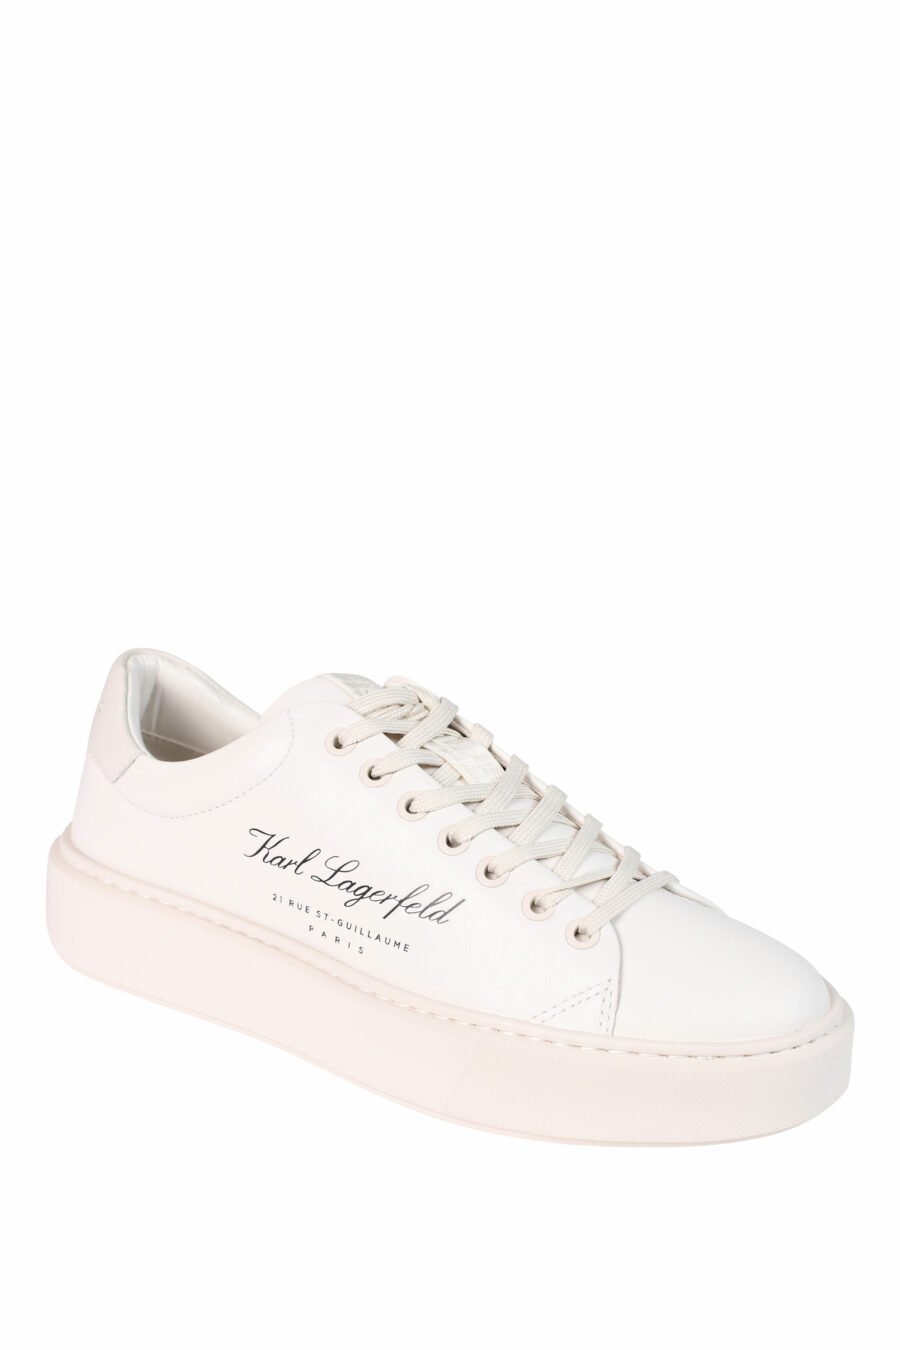 White trainers with calligraphic "hotel" logo - 5059529251054 2